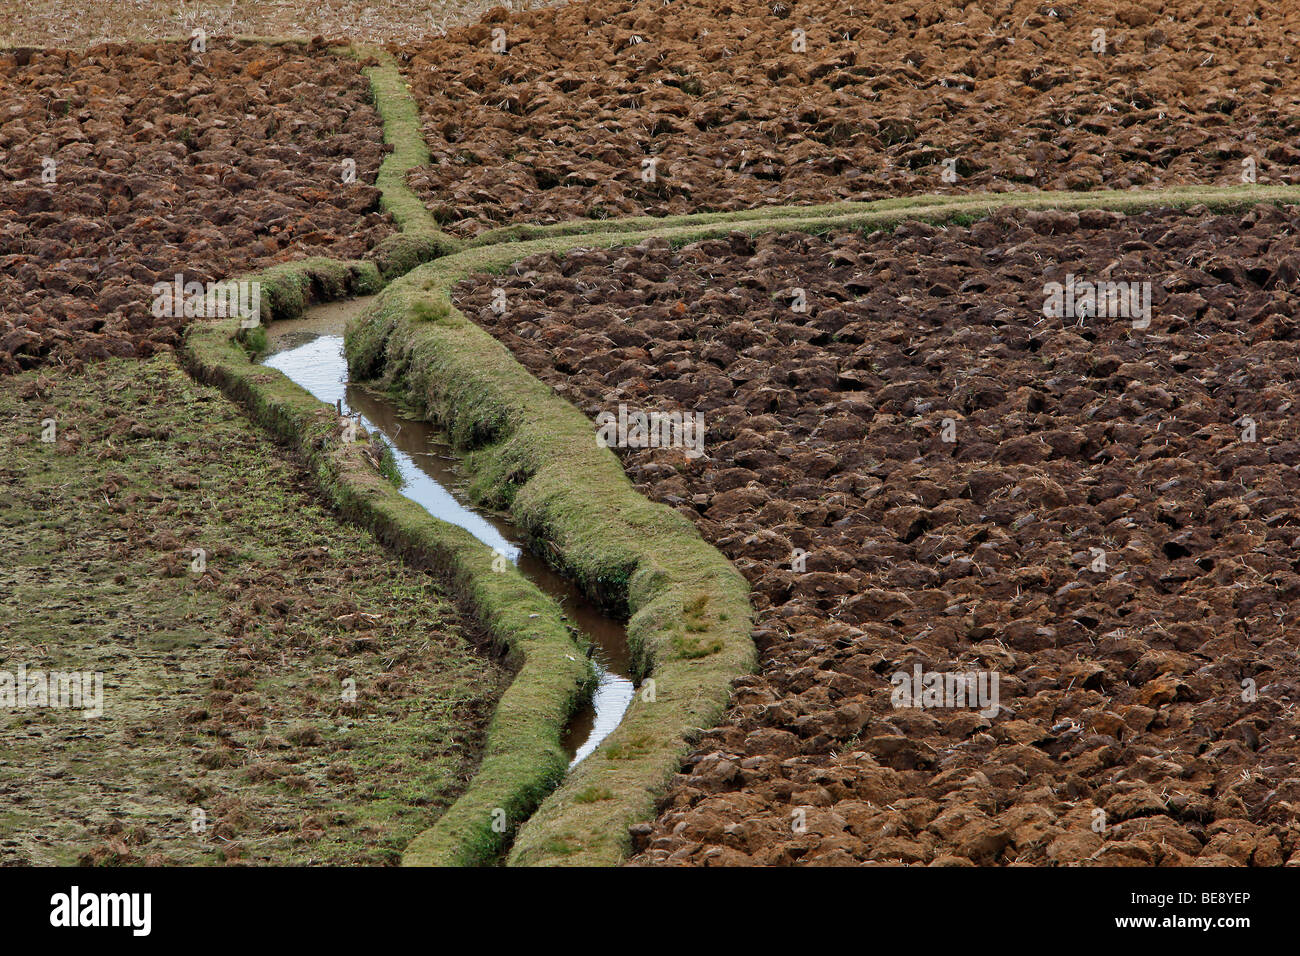 Rice paddy in the central highlands, Madagascar, Africa Stock Photo